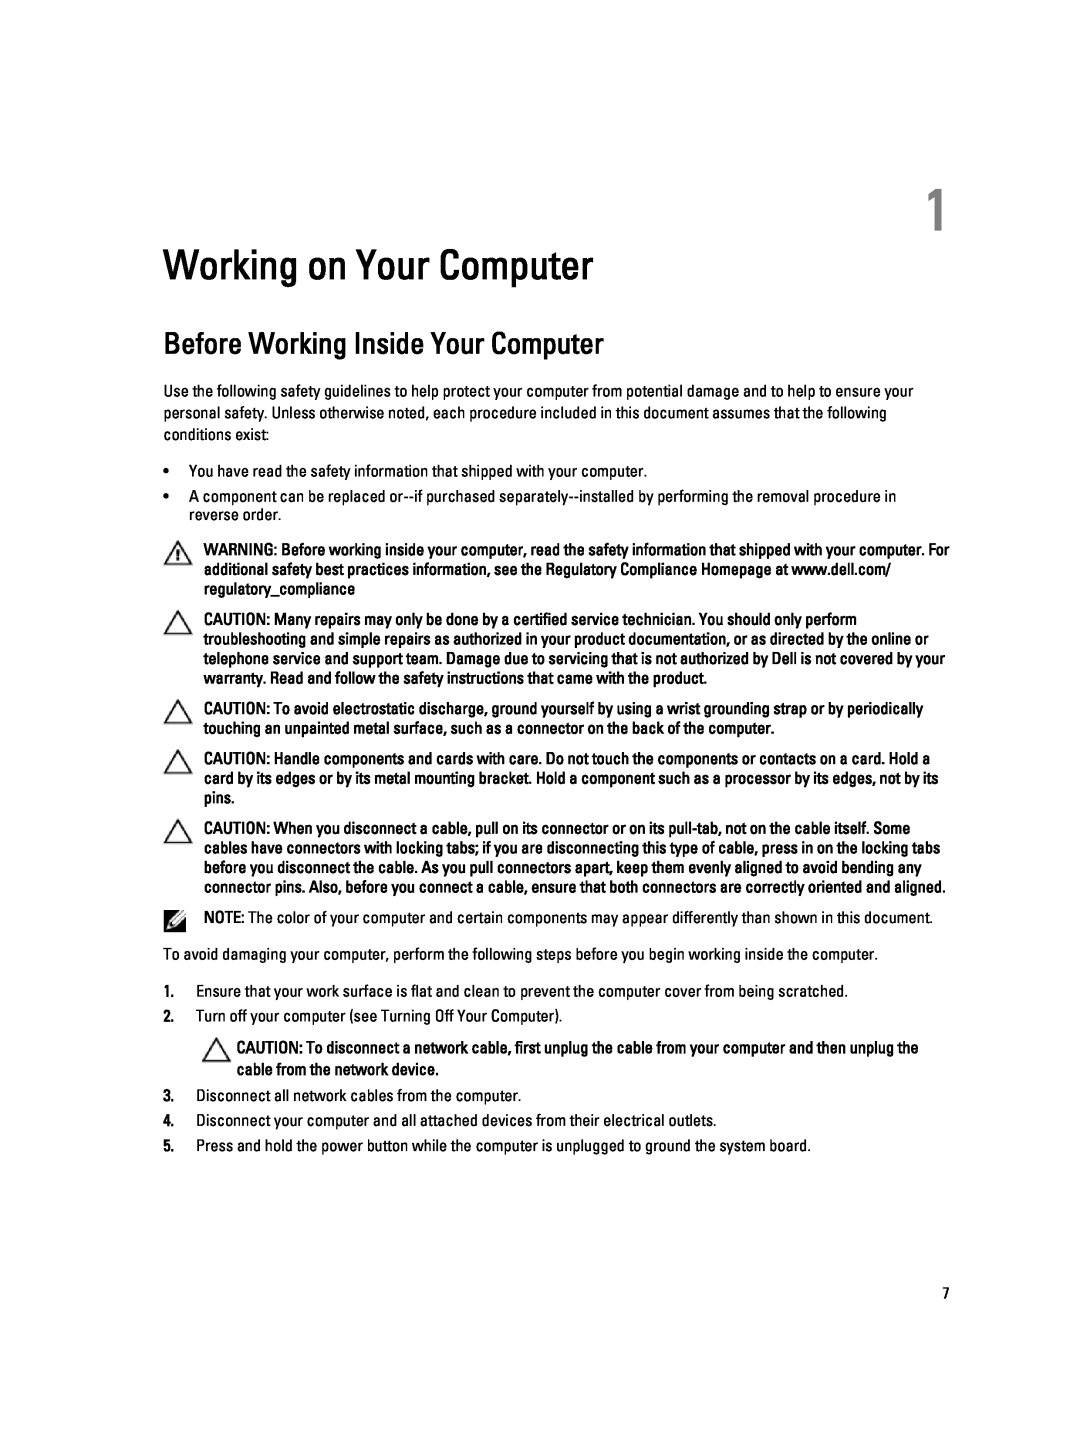 Dell T7610 owner manual Working on Your Computer, Before Working Inside Your Computer 